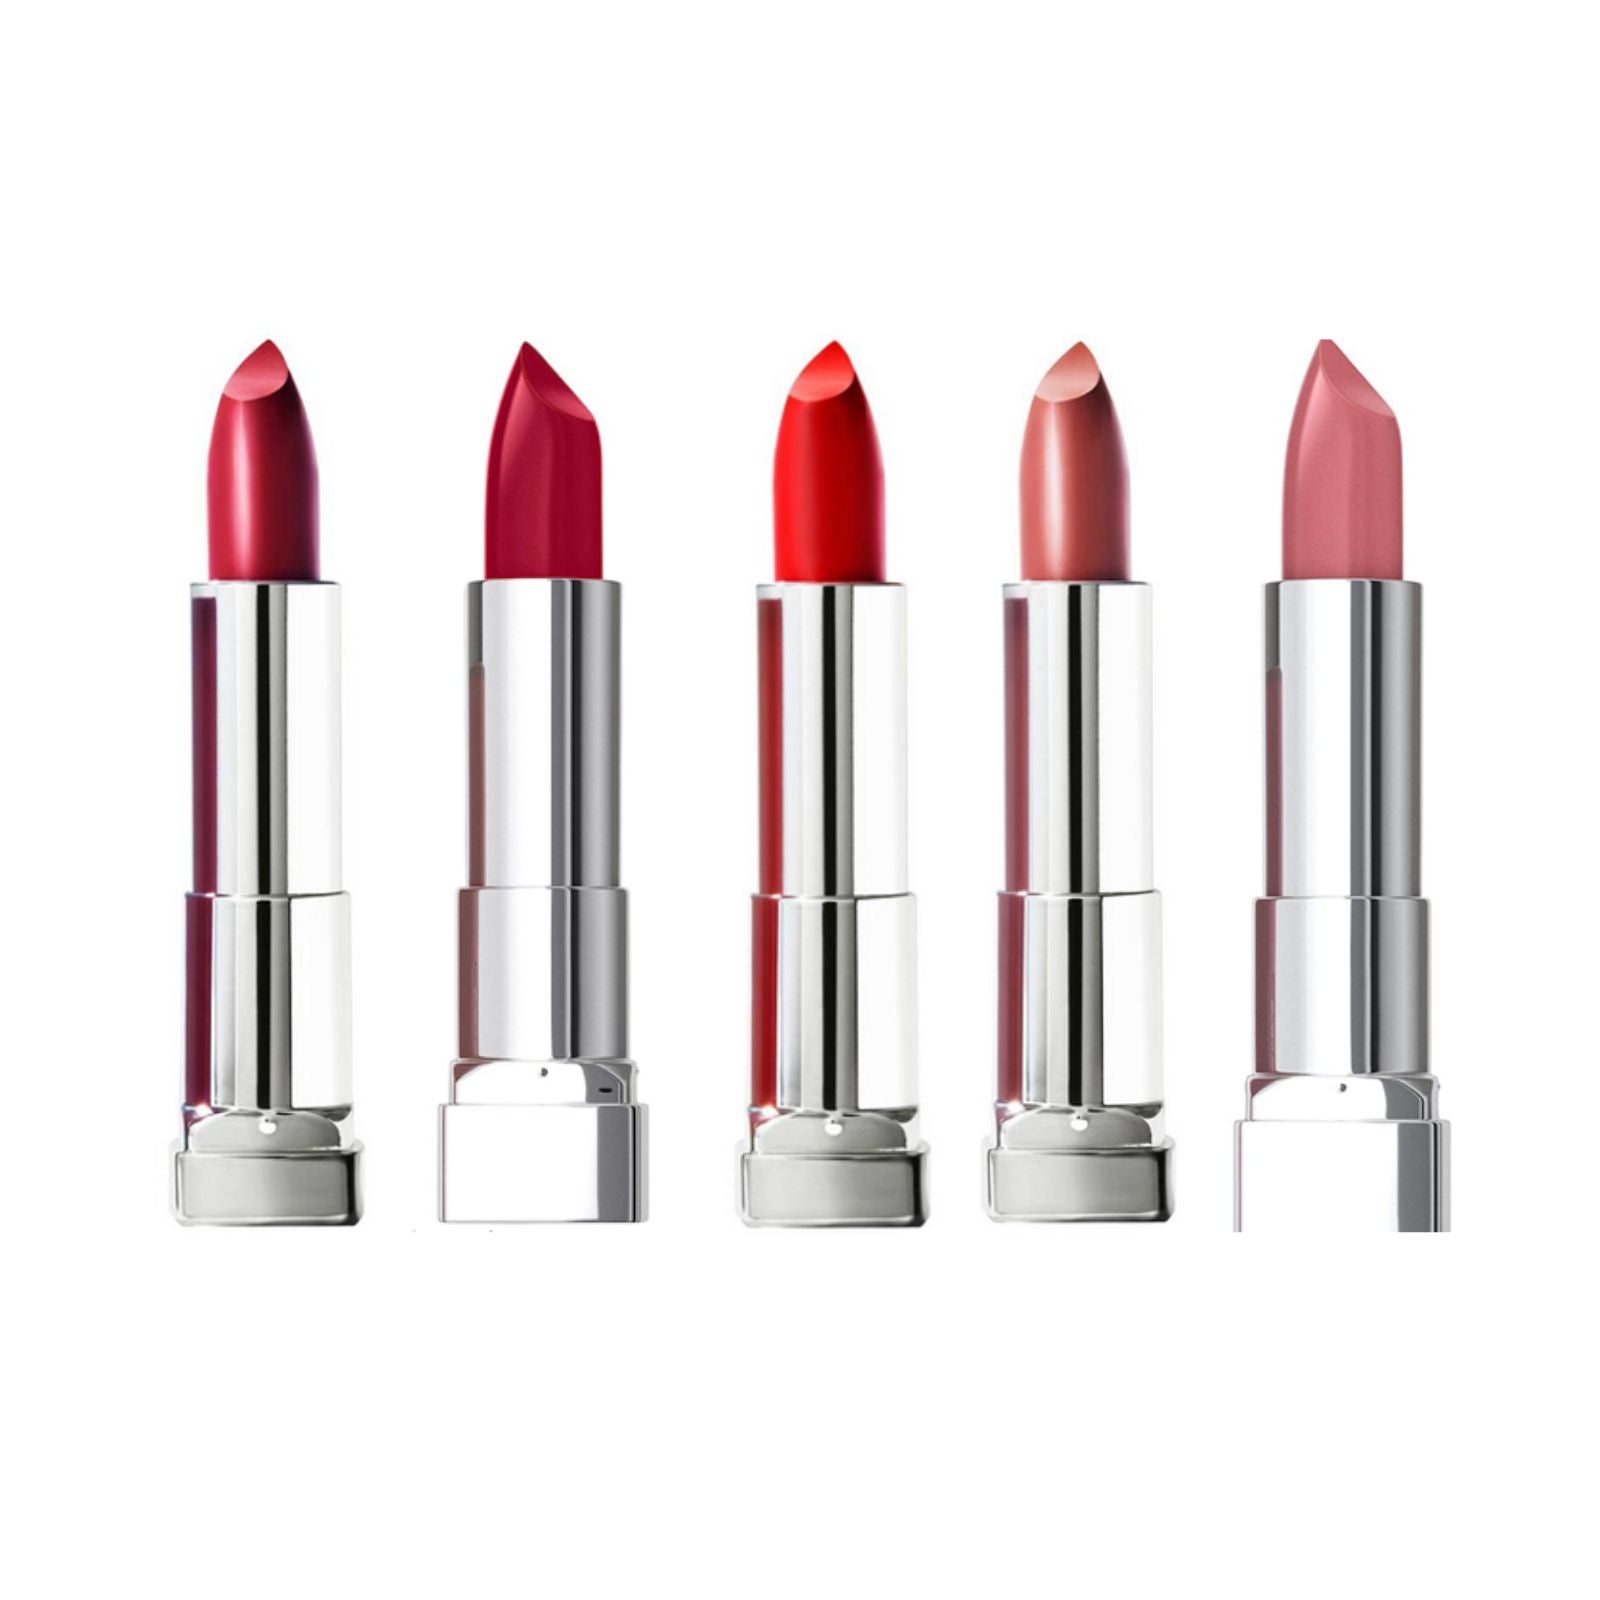 Makeup Maybelline Long-lasting Anytime Lipstick: – & Color, Hydrating Striking